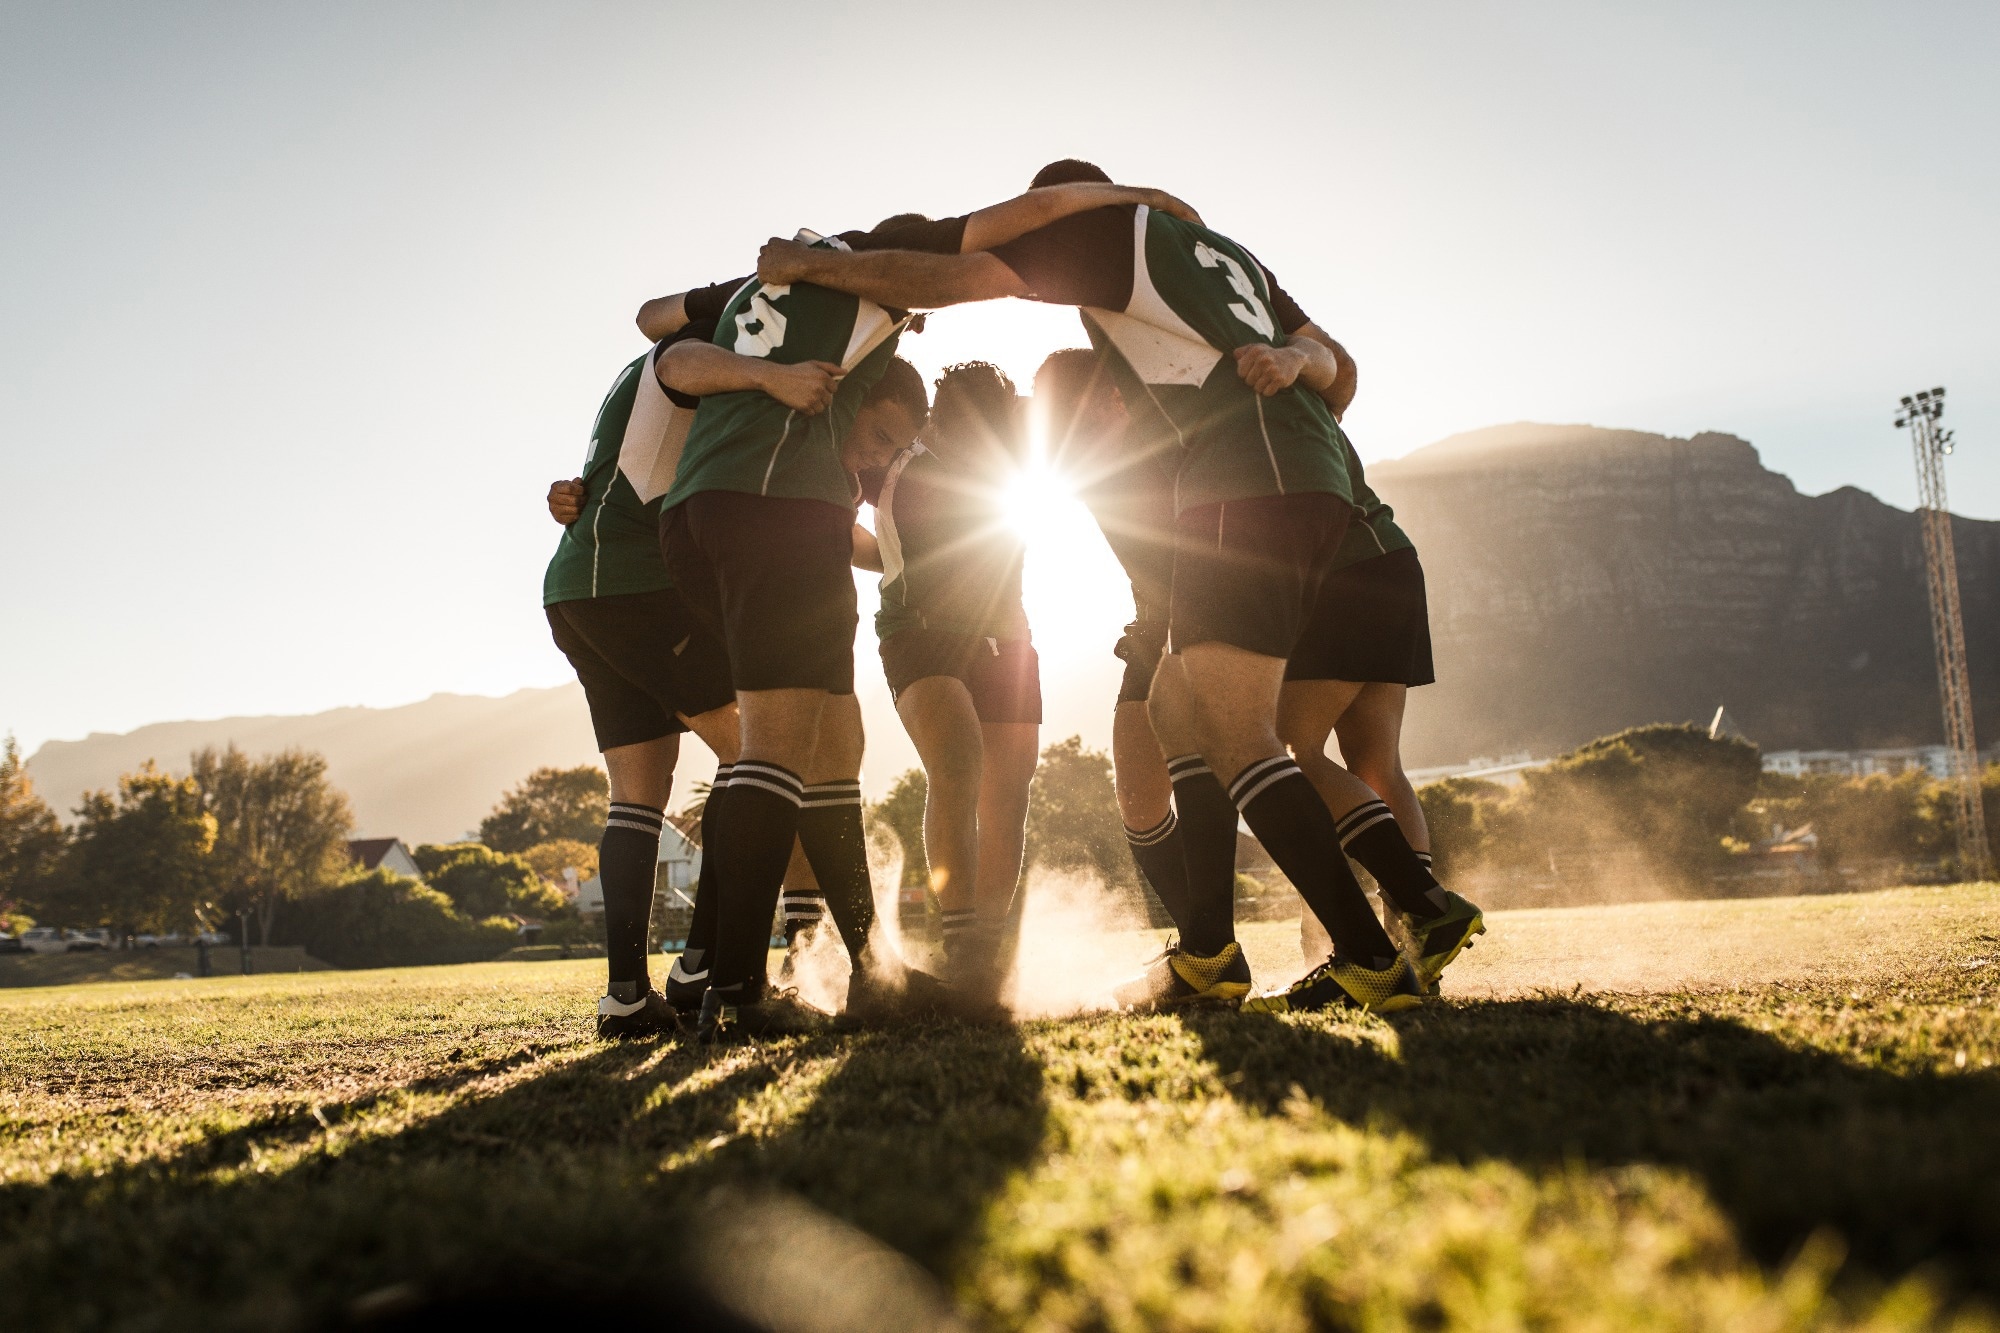 Study: Seasonal variation of cardiac structure and function in the elite rugby football league athlete. Image Credit: Jacob Lund / Shutterstock